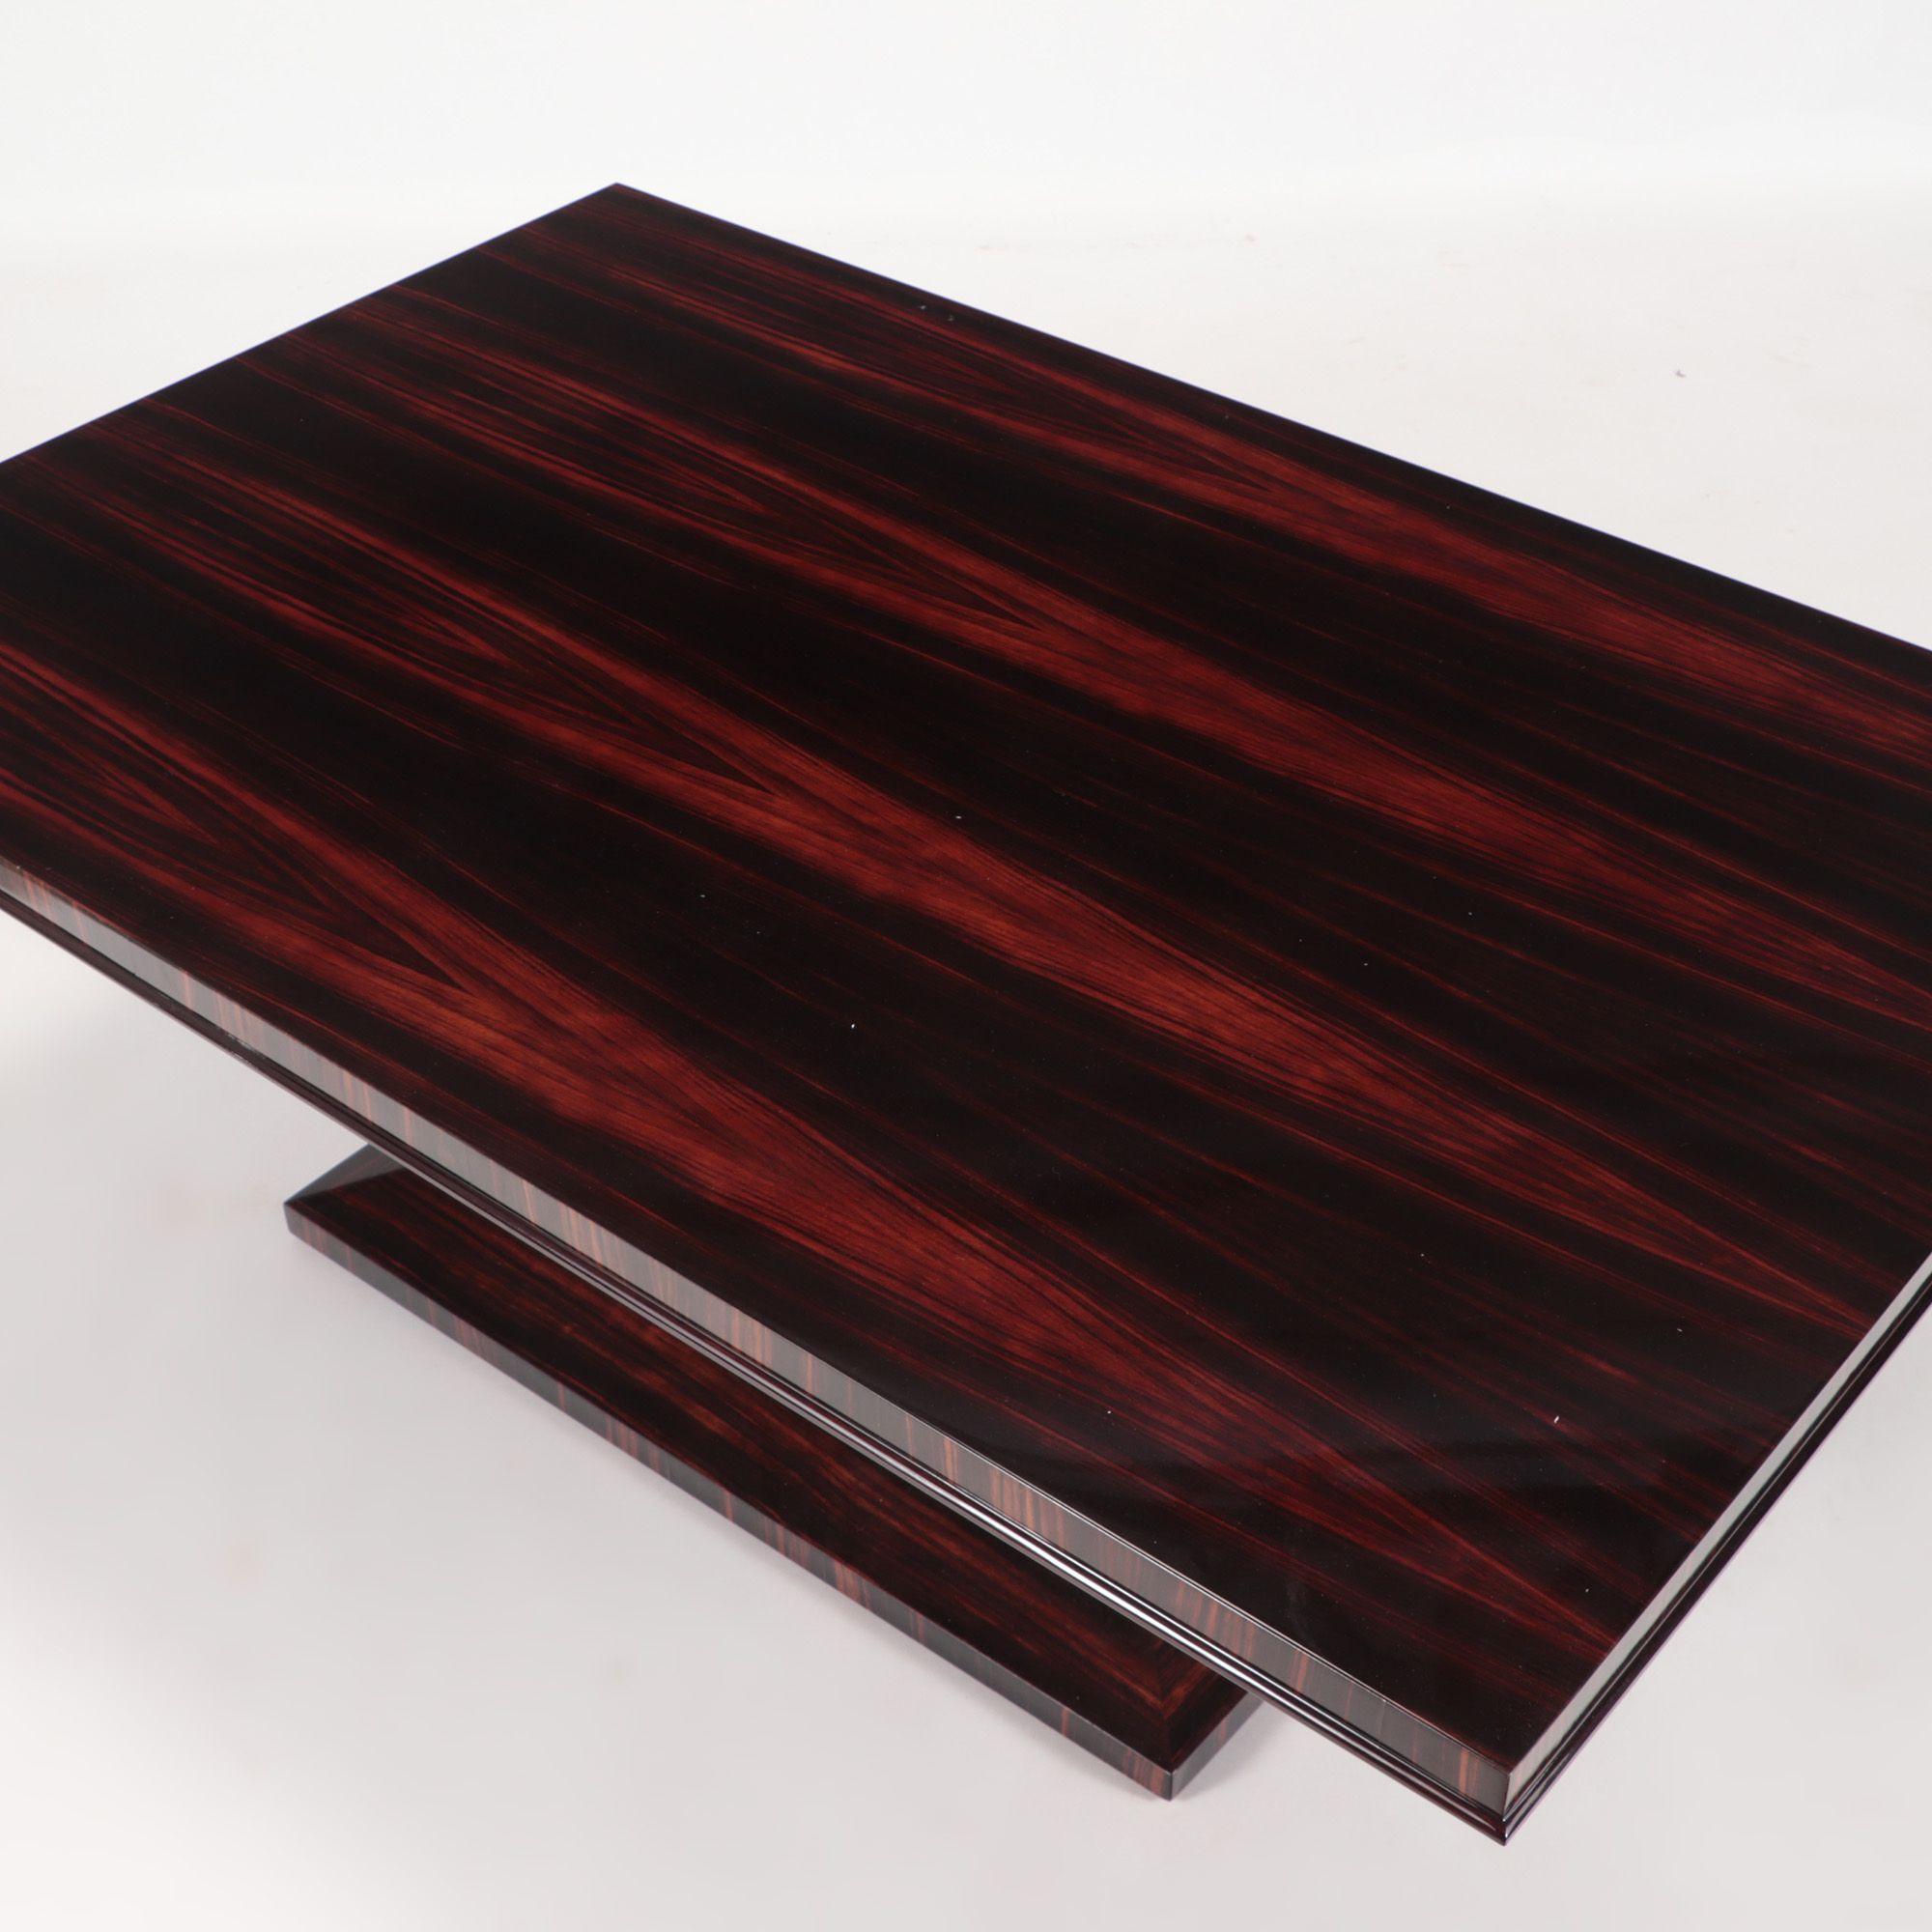 A French macassar ebony coffee table in the manner of Ruhlmann. Made by Romeo Furniture, Paris, France.  